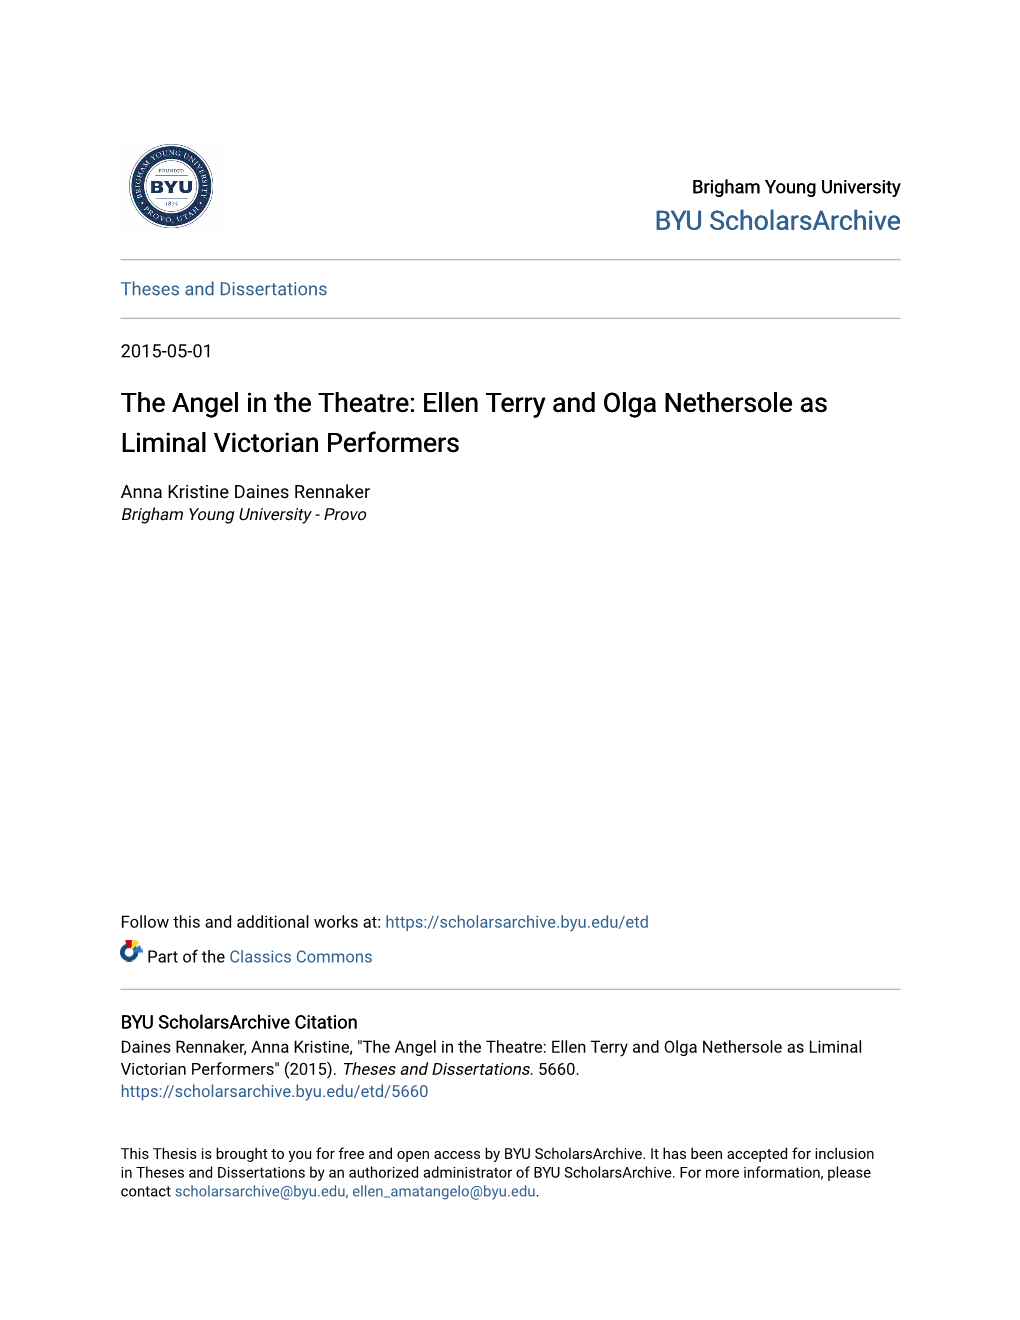 The Angel in the Theatre: Ellen Terry and Olga Nethersole As Liminal Victorian Performers